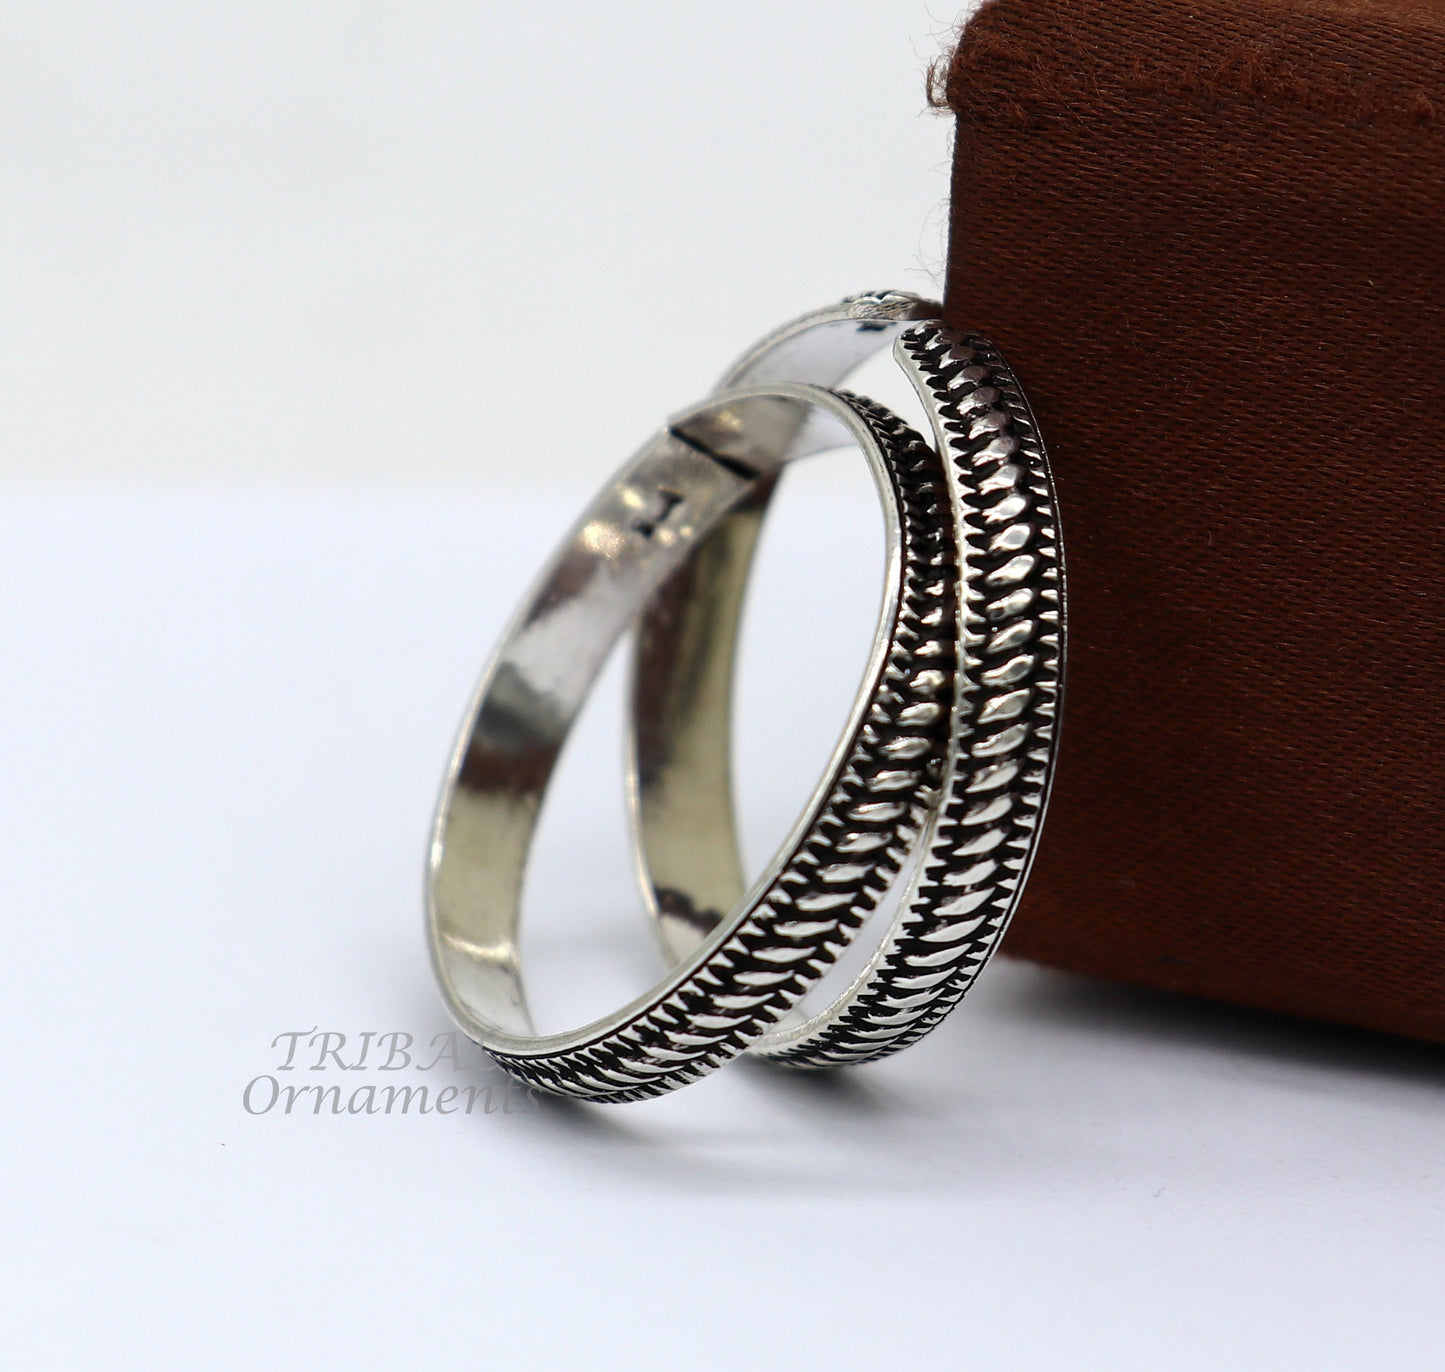 925 sterling silver modern trendy traditional cultural design thumb ring for foot, thumb toe ring band for brides wedding jewelry  ntr69 - TRIBAL ORNAMENTS